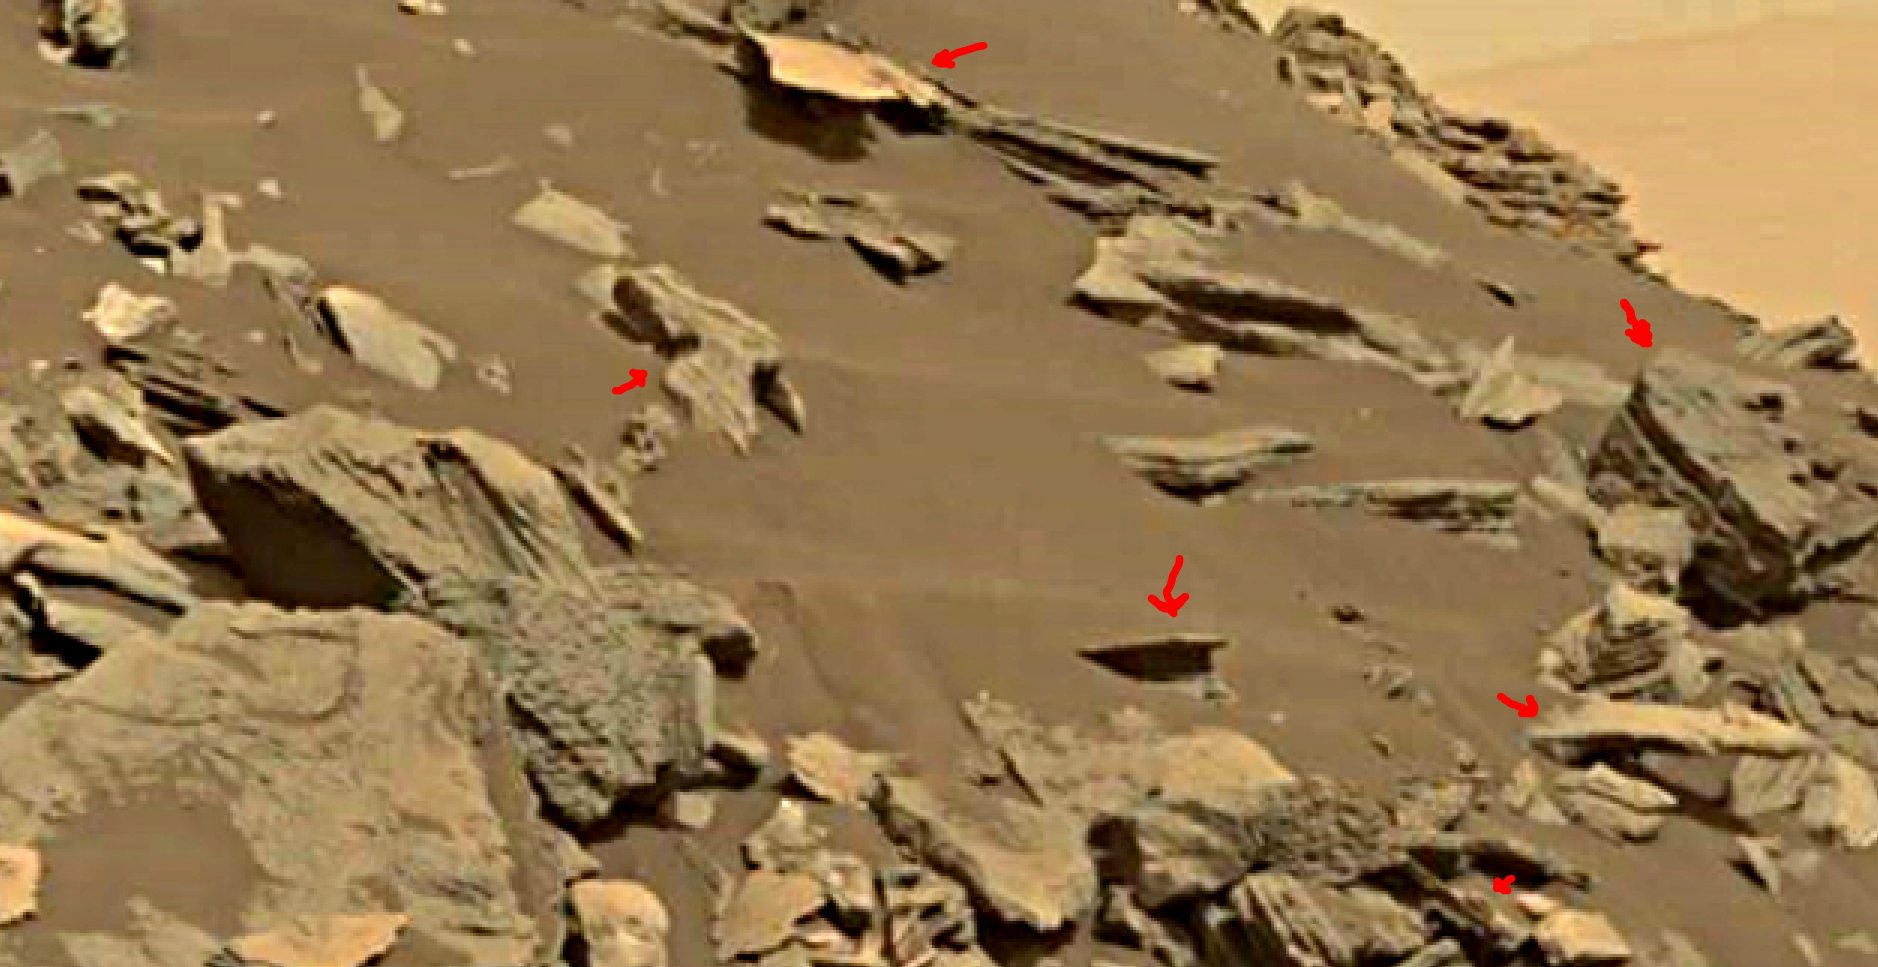 mars-sol-1451-anomaly-artifacts-11-was-life-on-mars